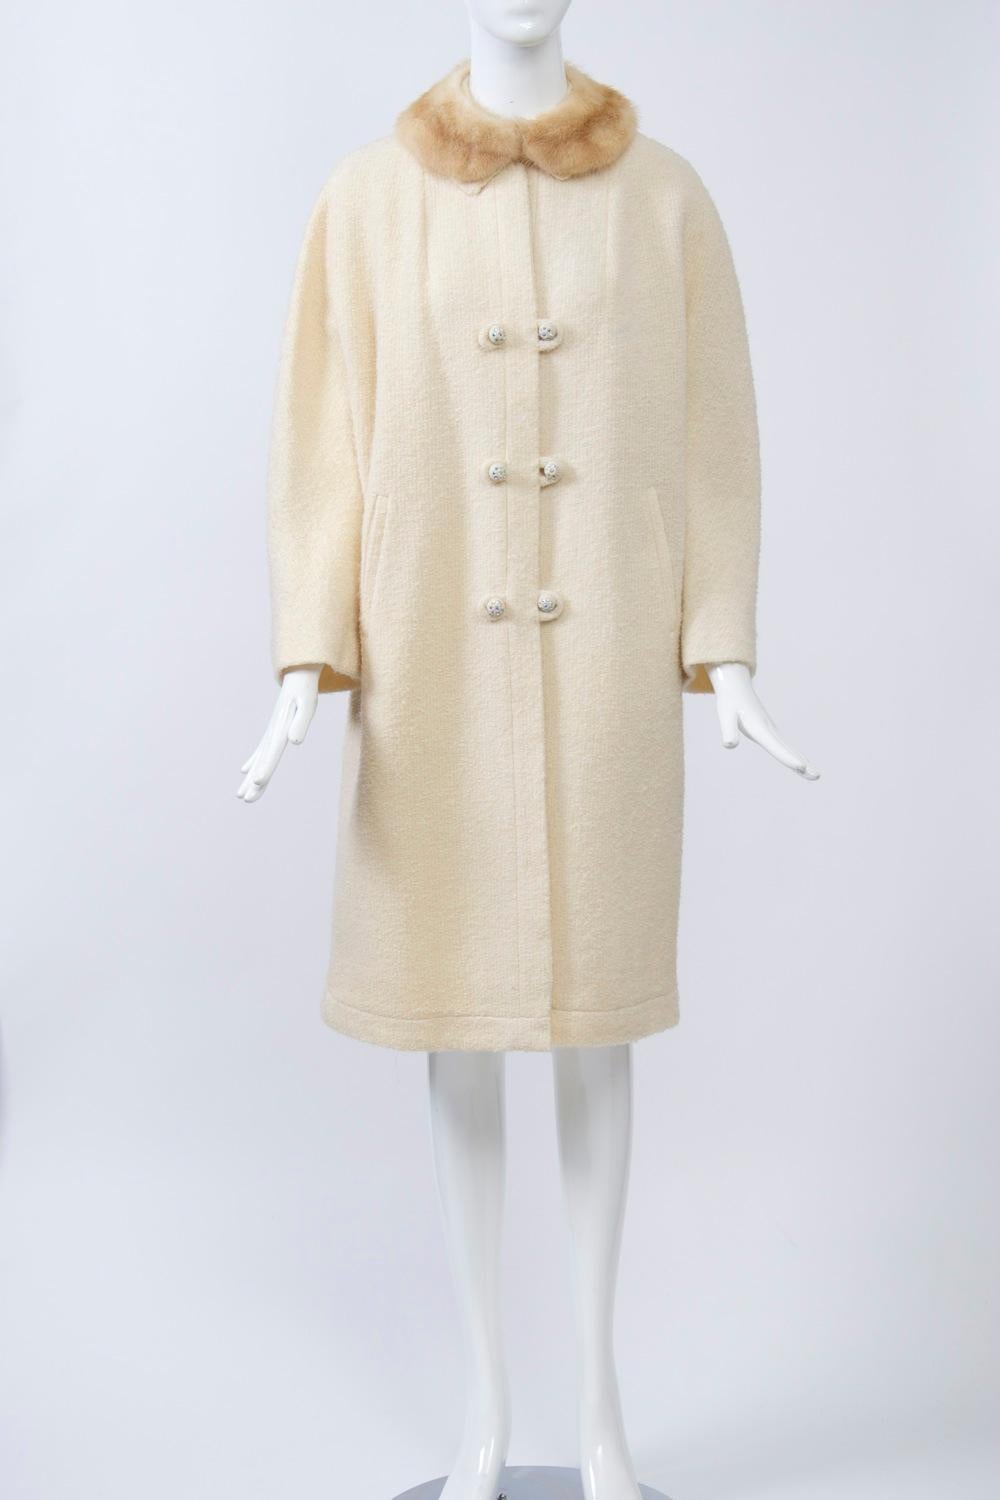 A lightweight coat from the 1960s composed of a nubby off-white wool and featuring a straight cut with dolman sleeves, a small mink collar, and a single-breasted closure system with mirror-image loops and rhinestone-studded buttons. Stitched border